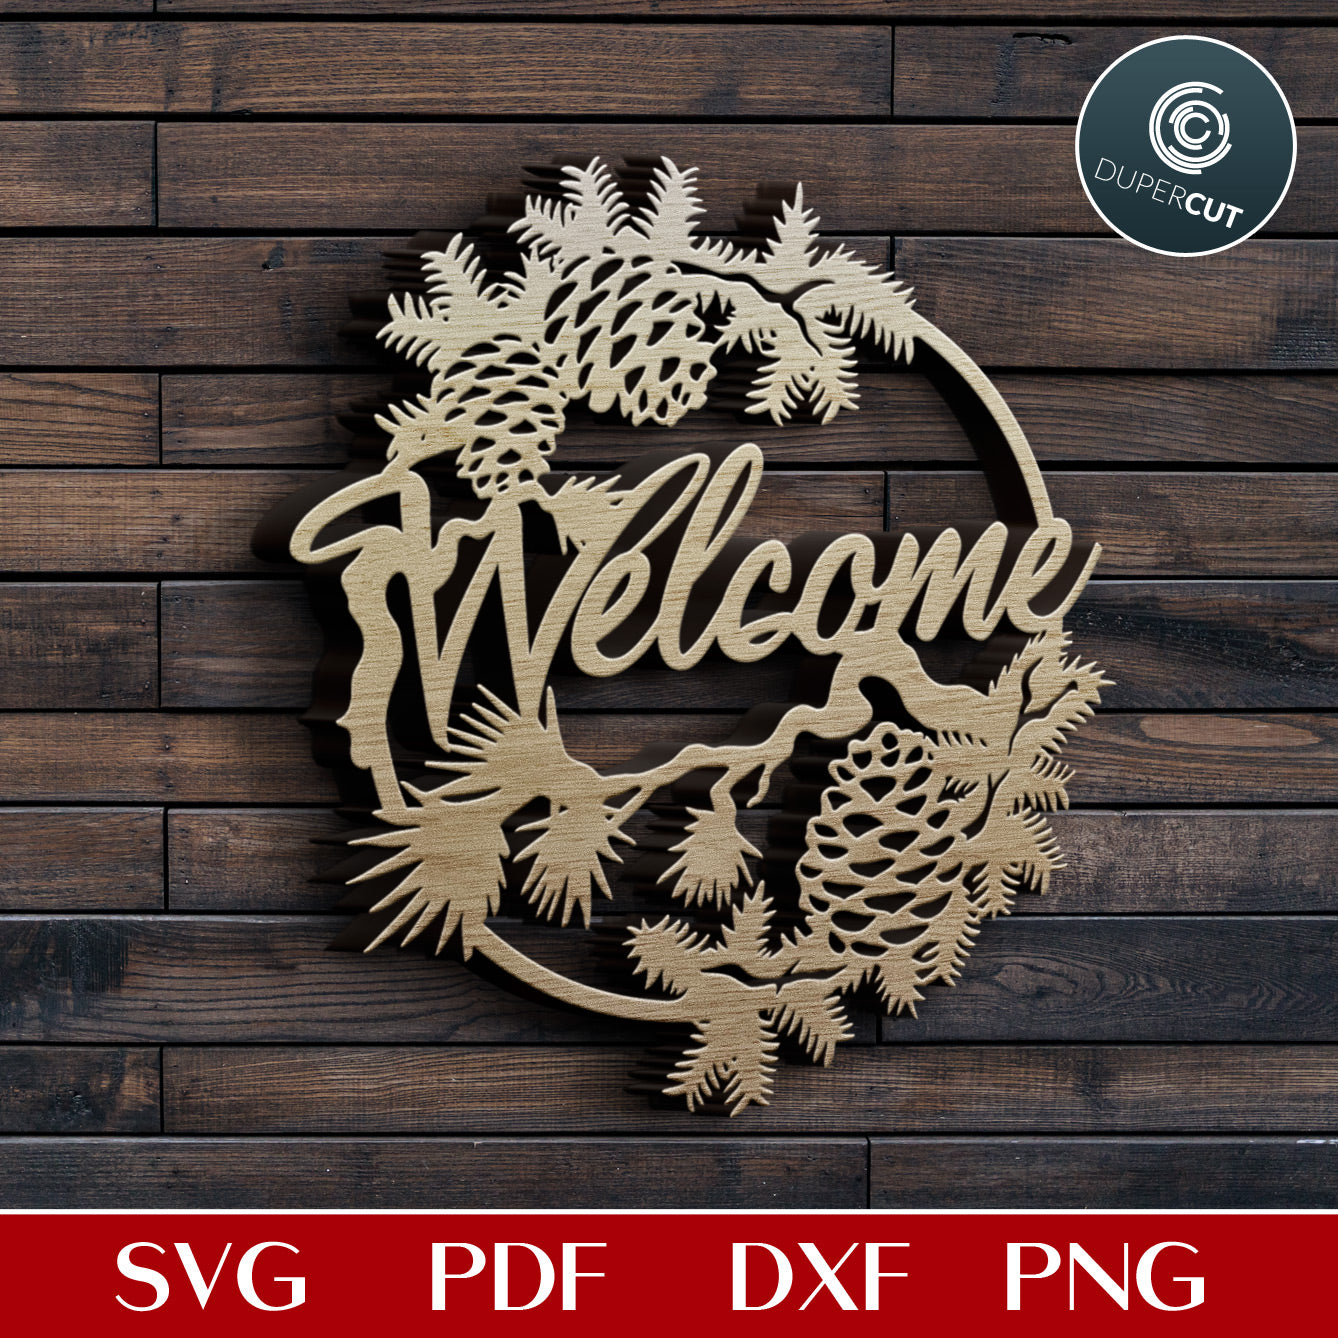 Pinecone welcome sign - layered laser cutting files SVG PDF DXF vector template for Glowforge, Cricut, Silhouette Cameo, CNC plasma machines